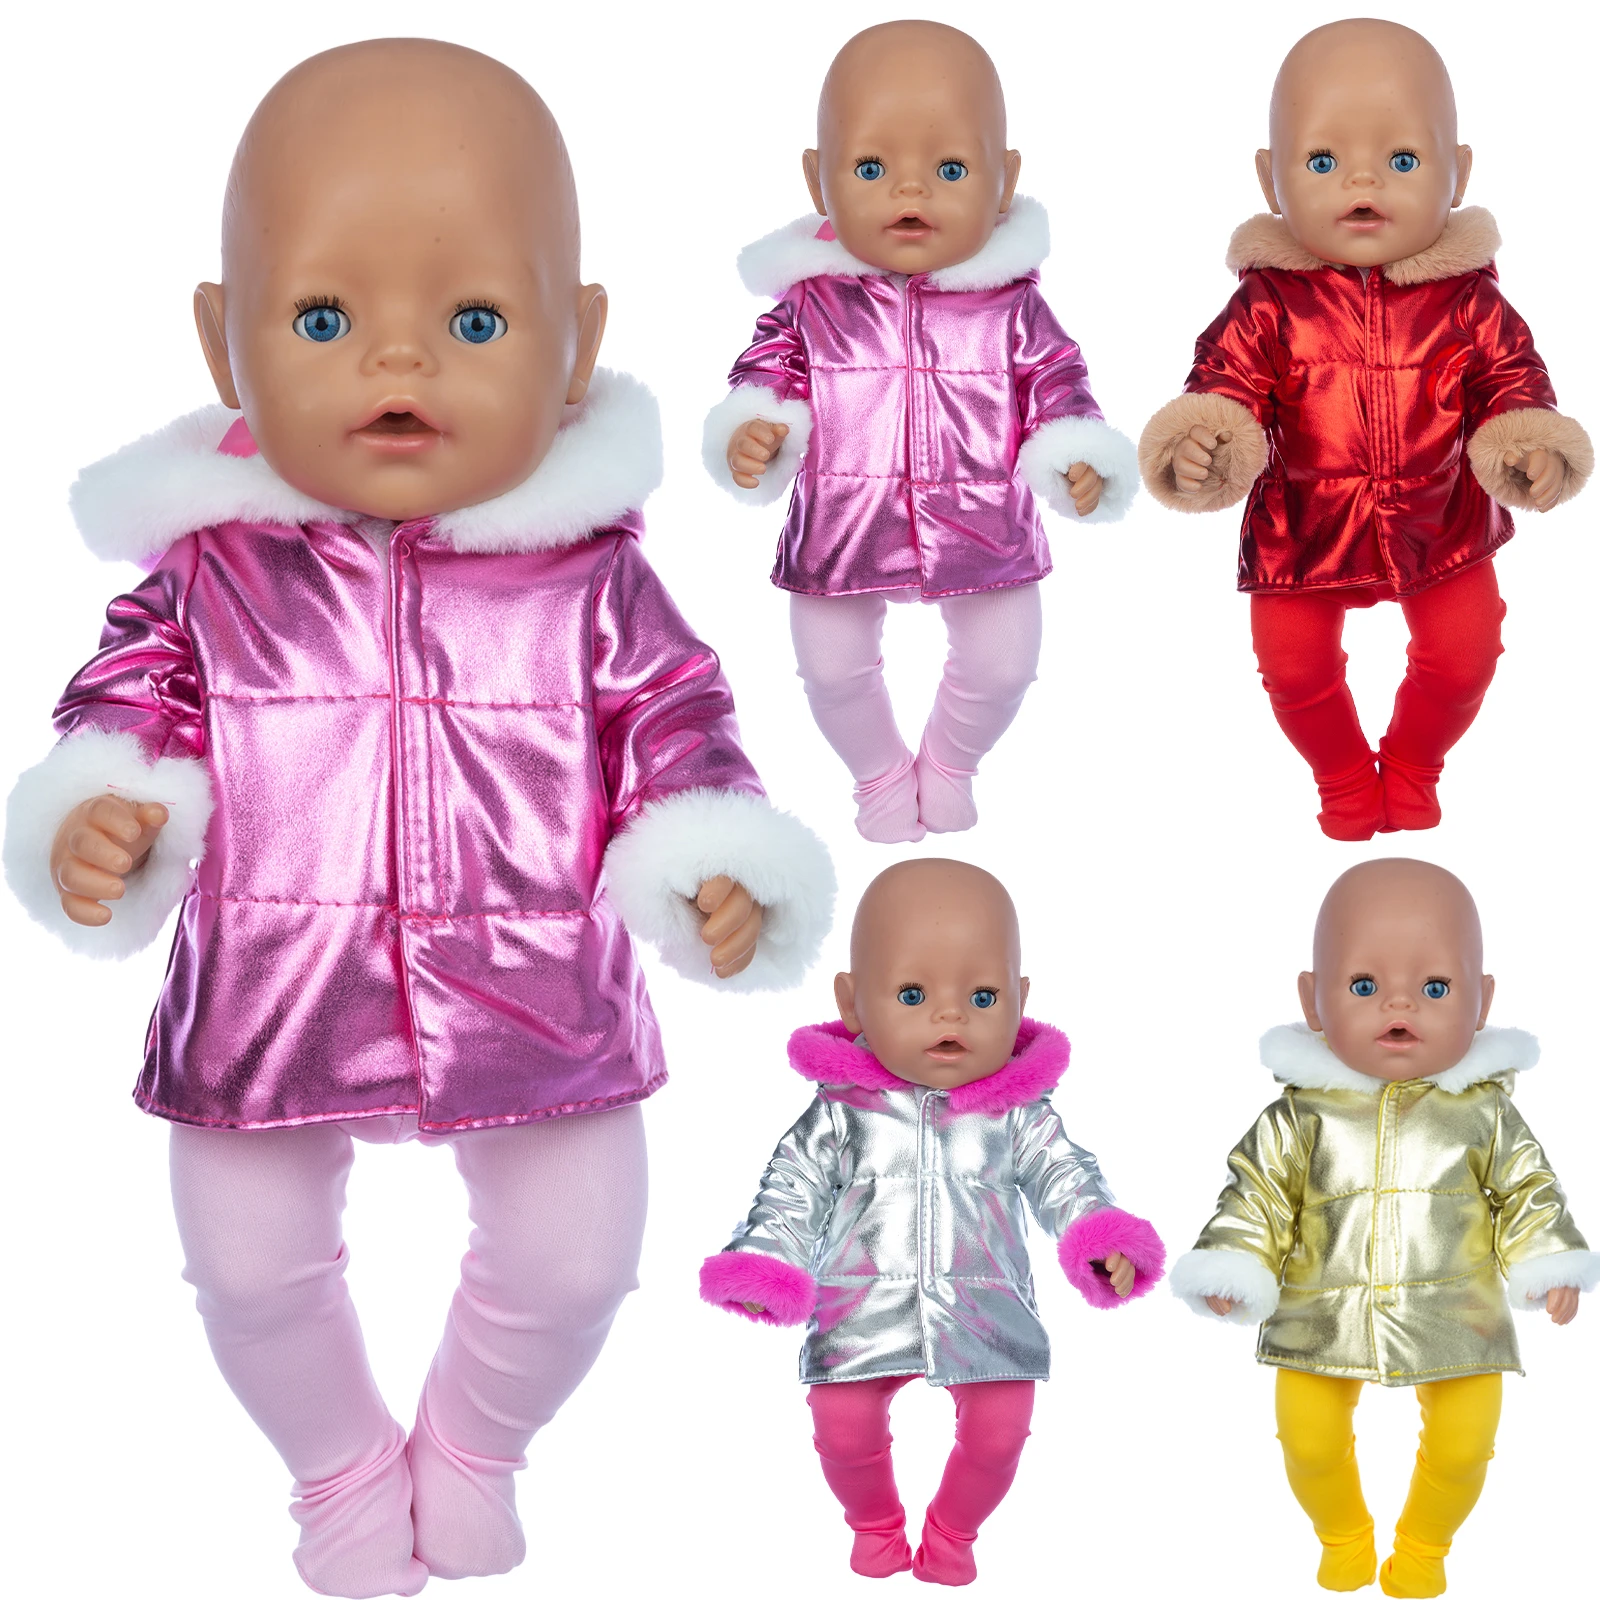 2020 New Down jacket + leggings Doll Clothes Fit For 18inch/43cm born baby Doll clothes reborn Doll Accessories